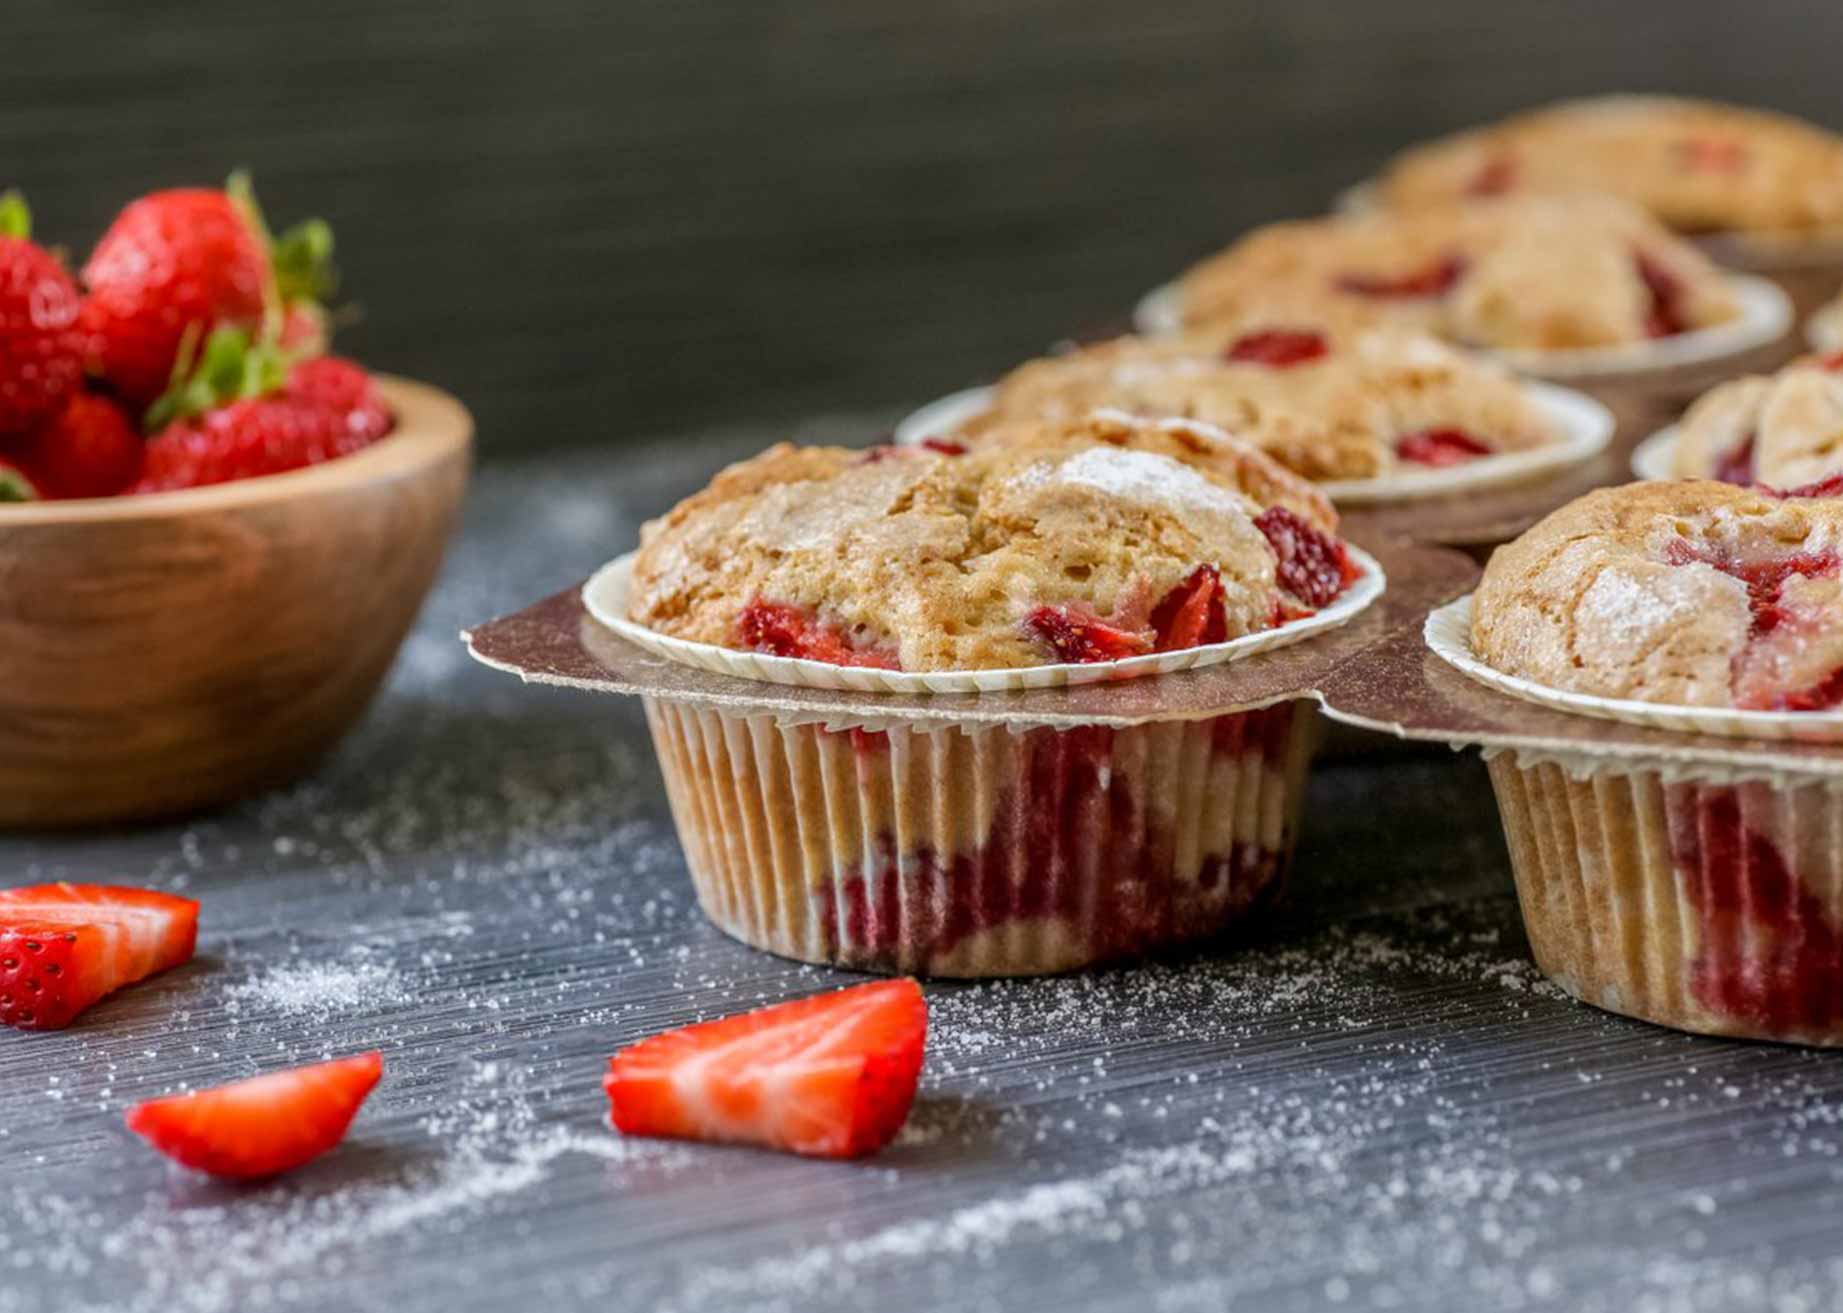 Novacart NTS muffin tray and strawberry muffins